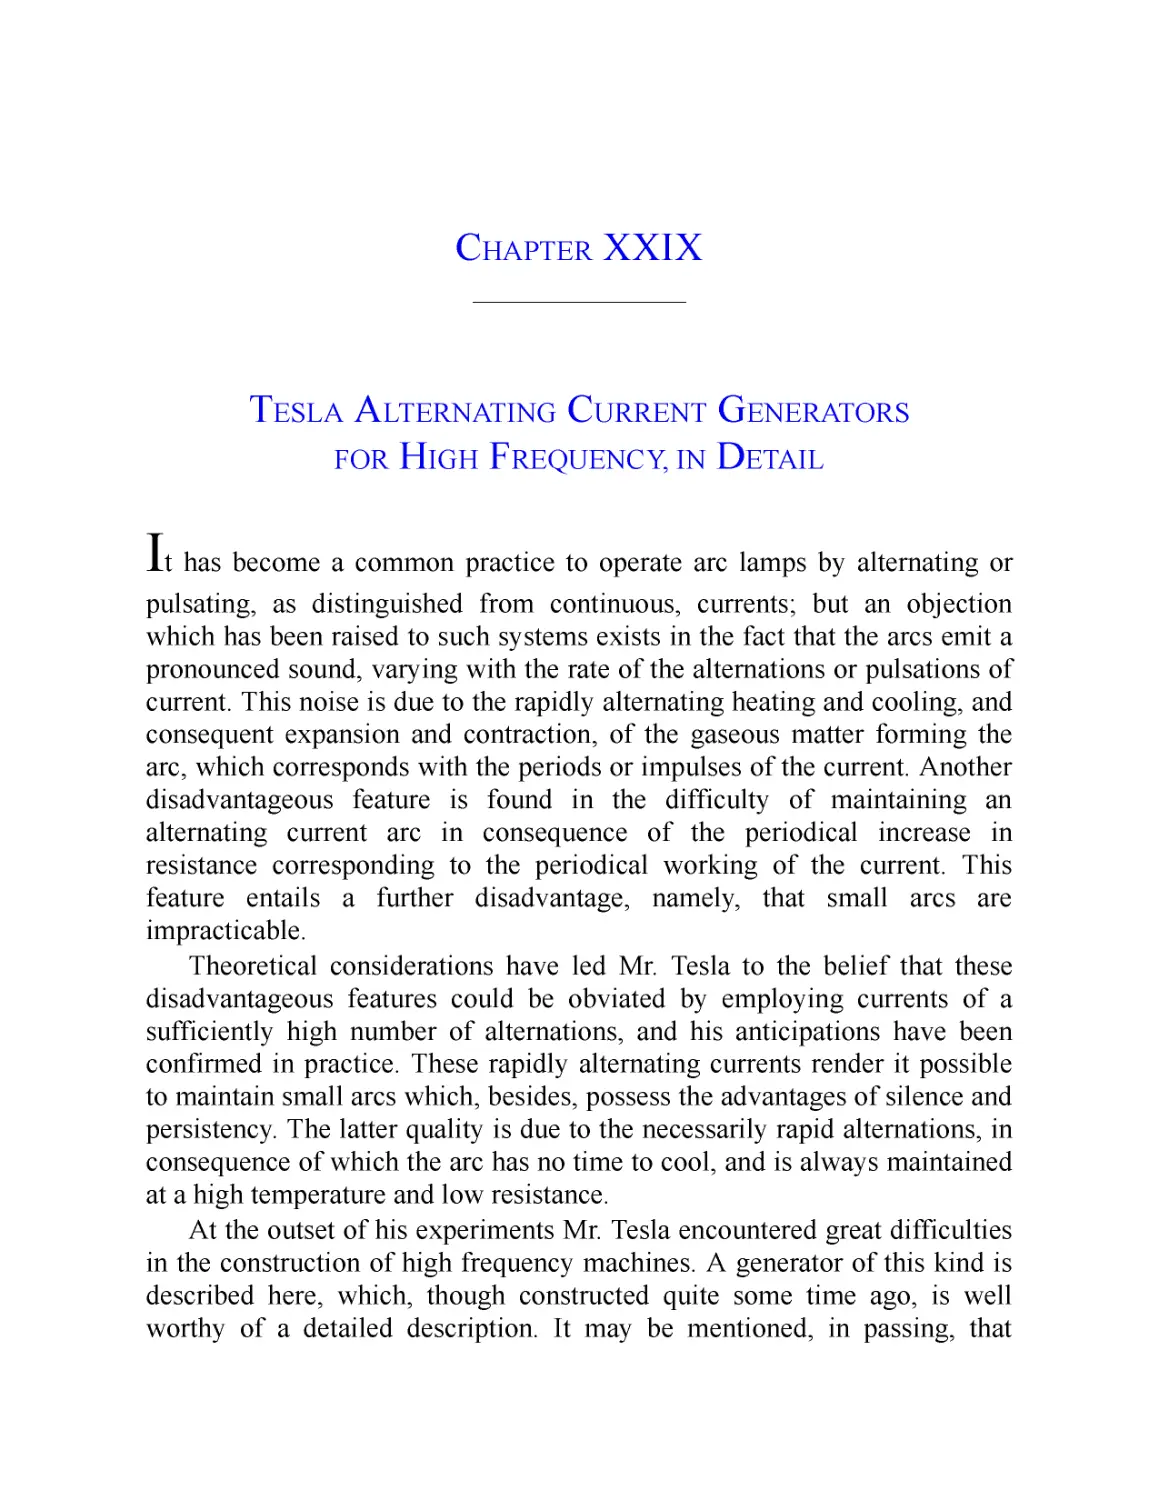 ﻿Chapter XXIX: Tesla Alternating Current Generators for High Frequency, in Detai